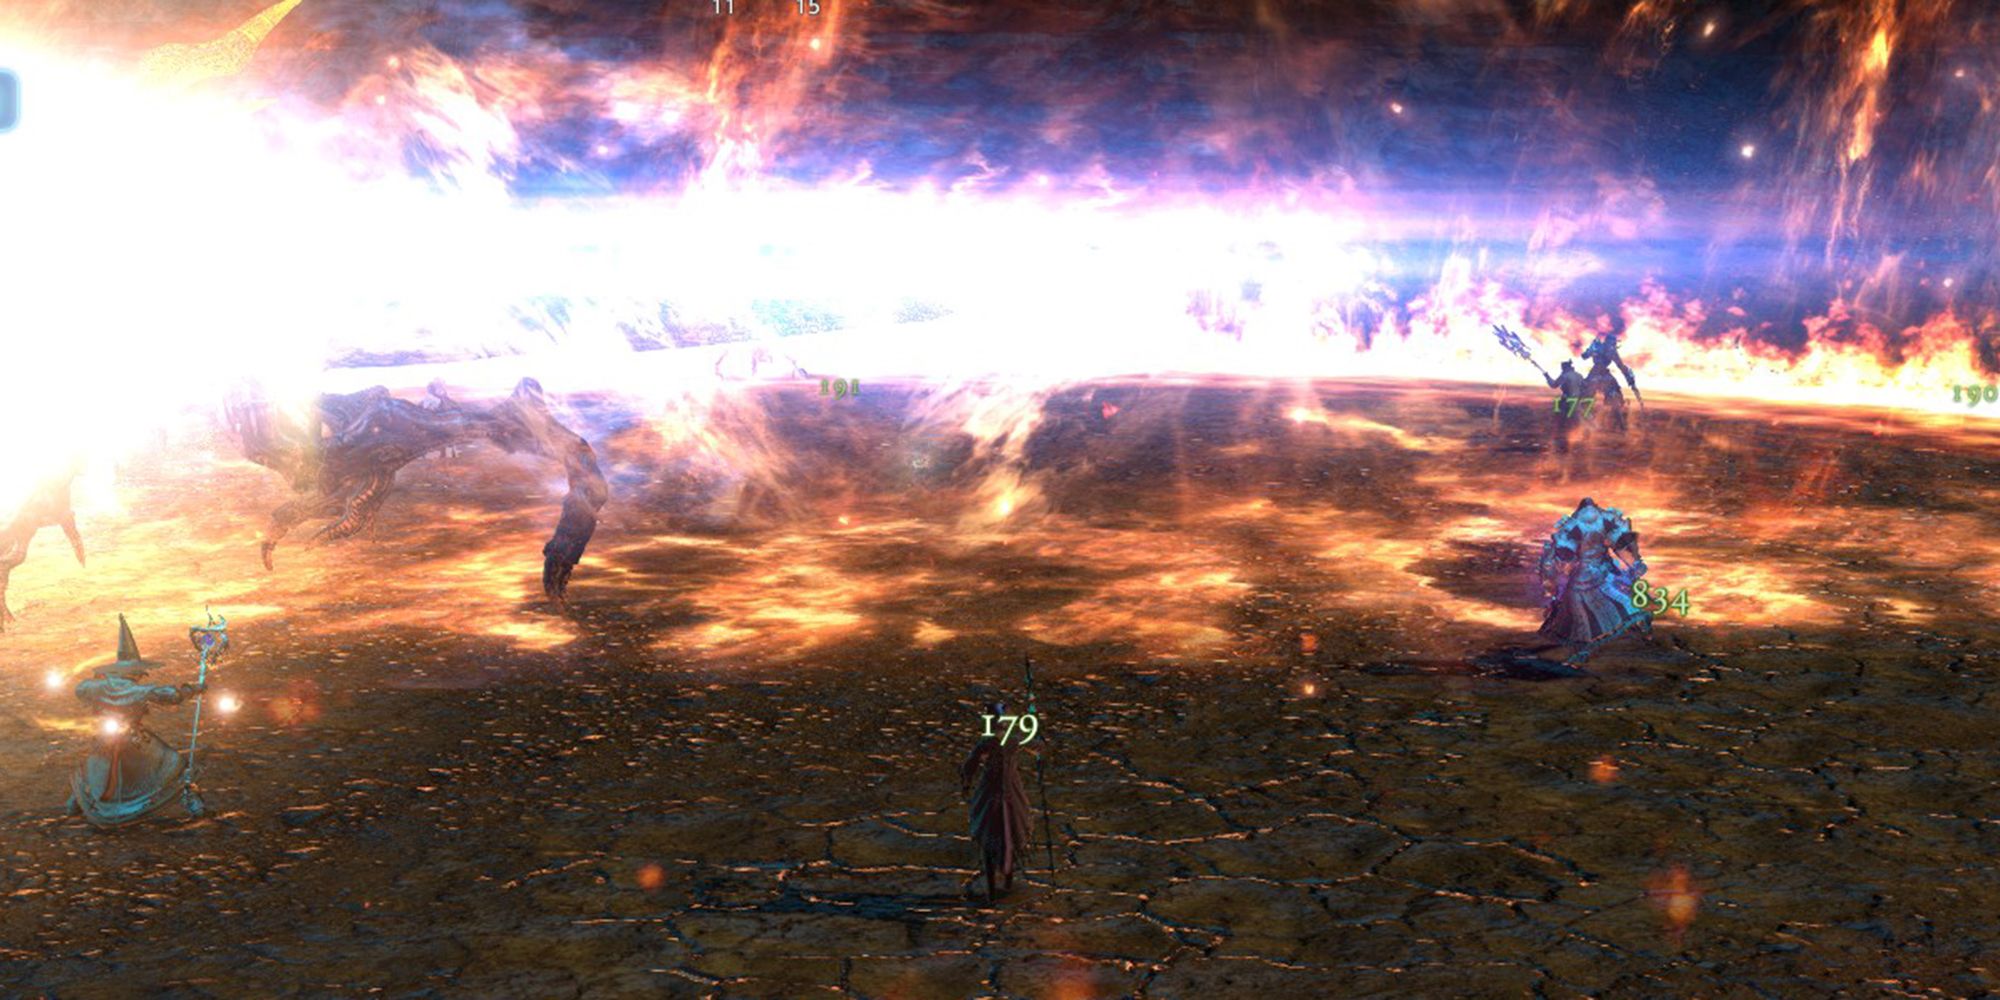 Refuge of embers. Ифрит Final Fantasy 14. Ifrit Final Fantasy 14. The waking Sands.